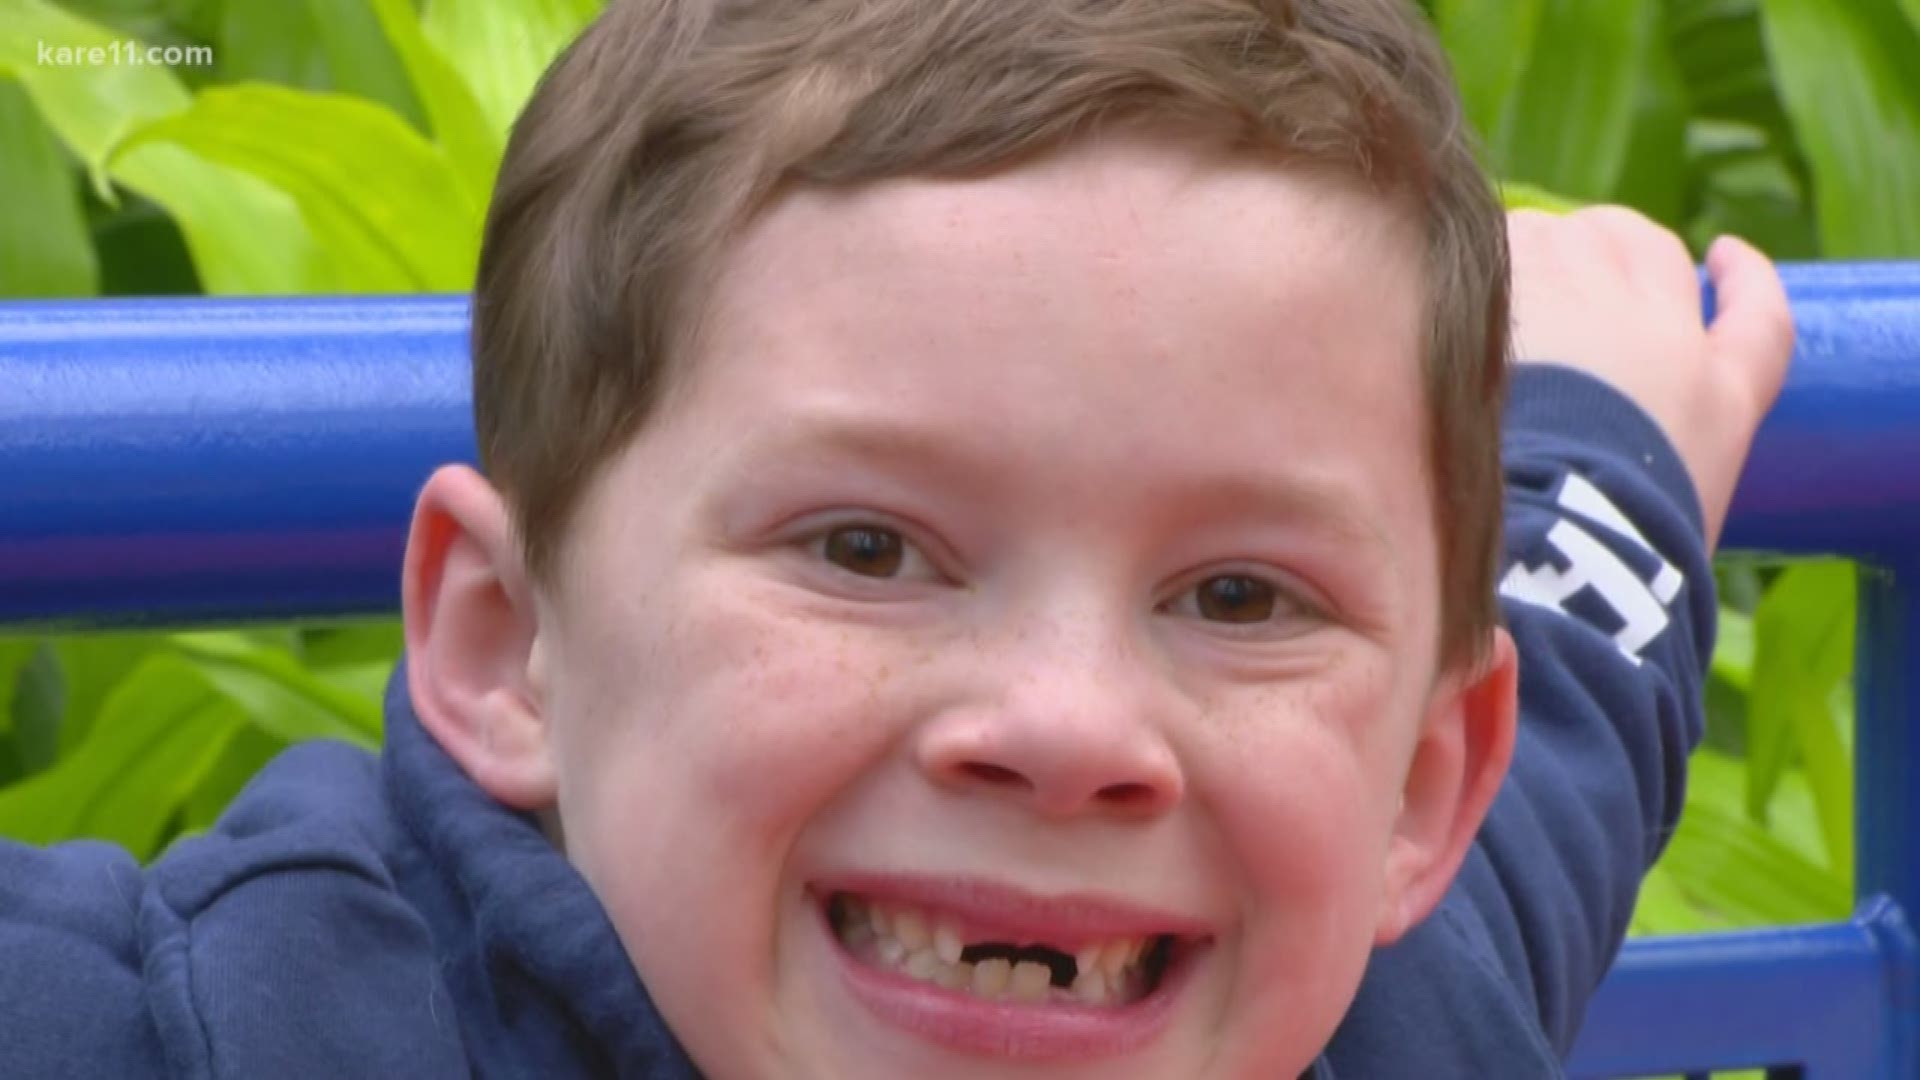 His smiles have landed him millions of followers online. Gavin Thomas, known by many people on social media as the "fake smiling boy," is an 8-year-old who lives right here in Minnesota.